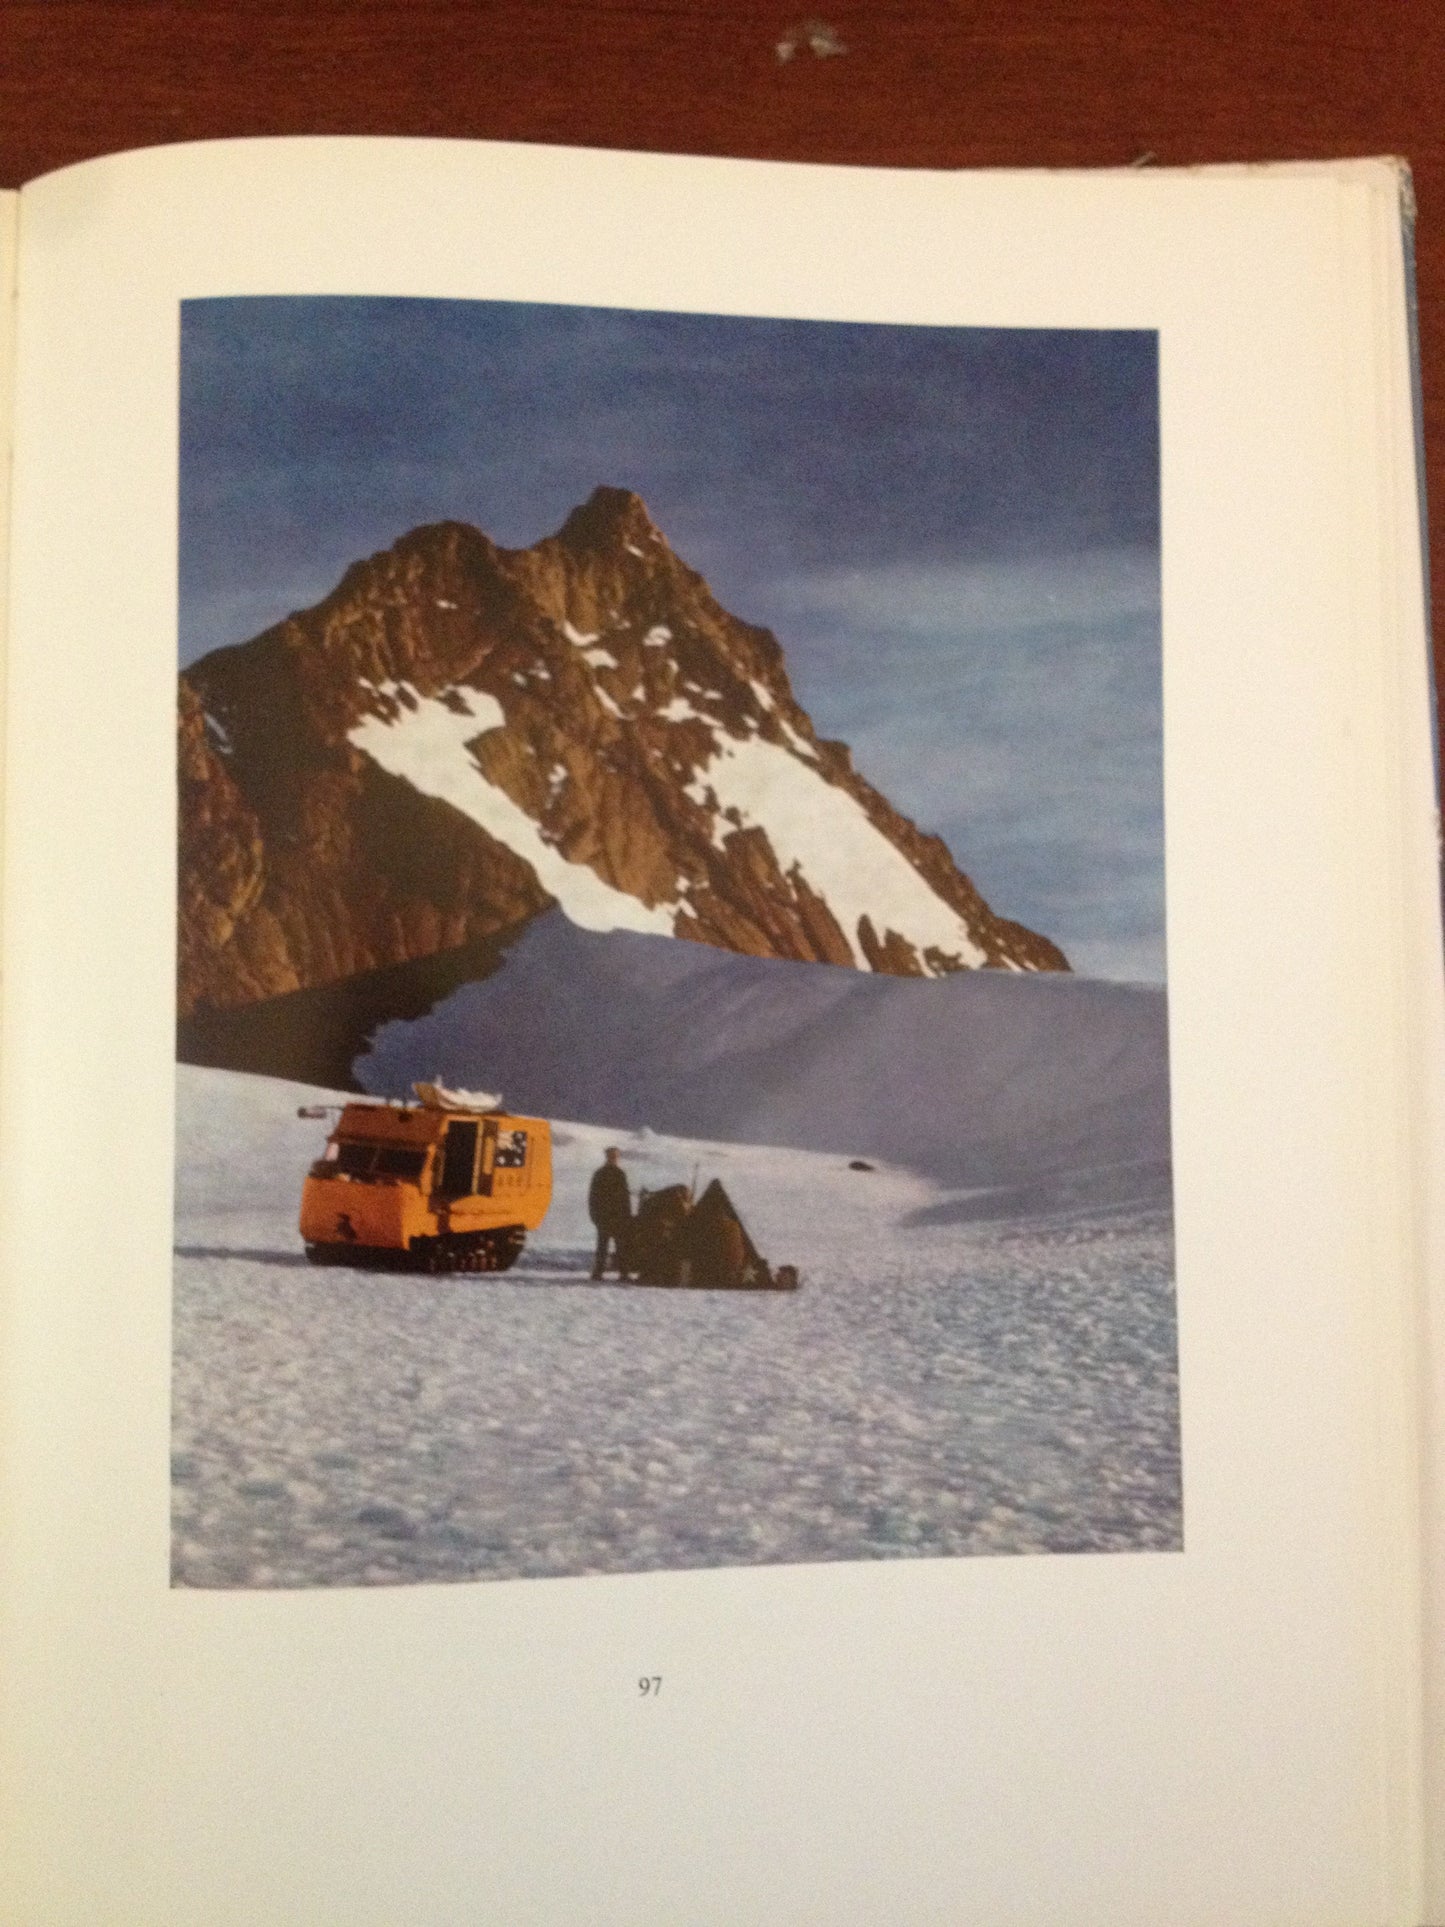 ANARE AUSTRALIA'S ANTARCTIC OUTPOSTS  BY: PHILLIP LAW BooksCardsNBikes